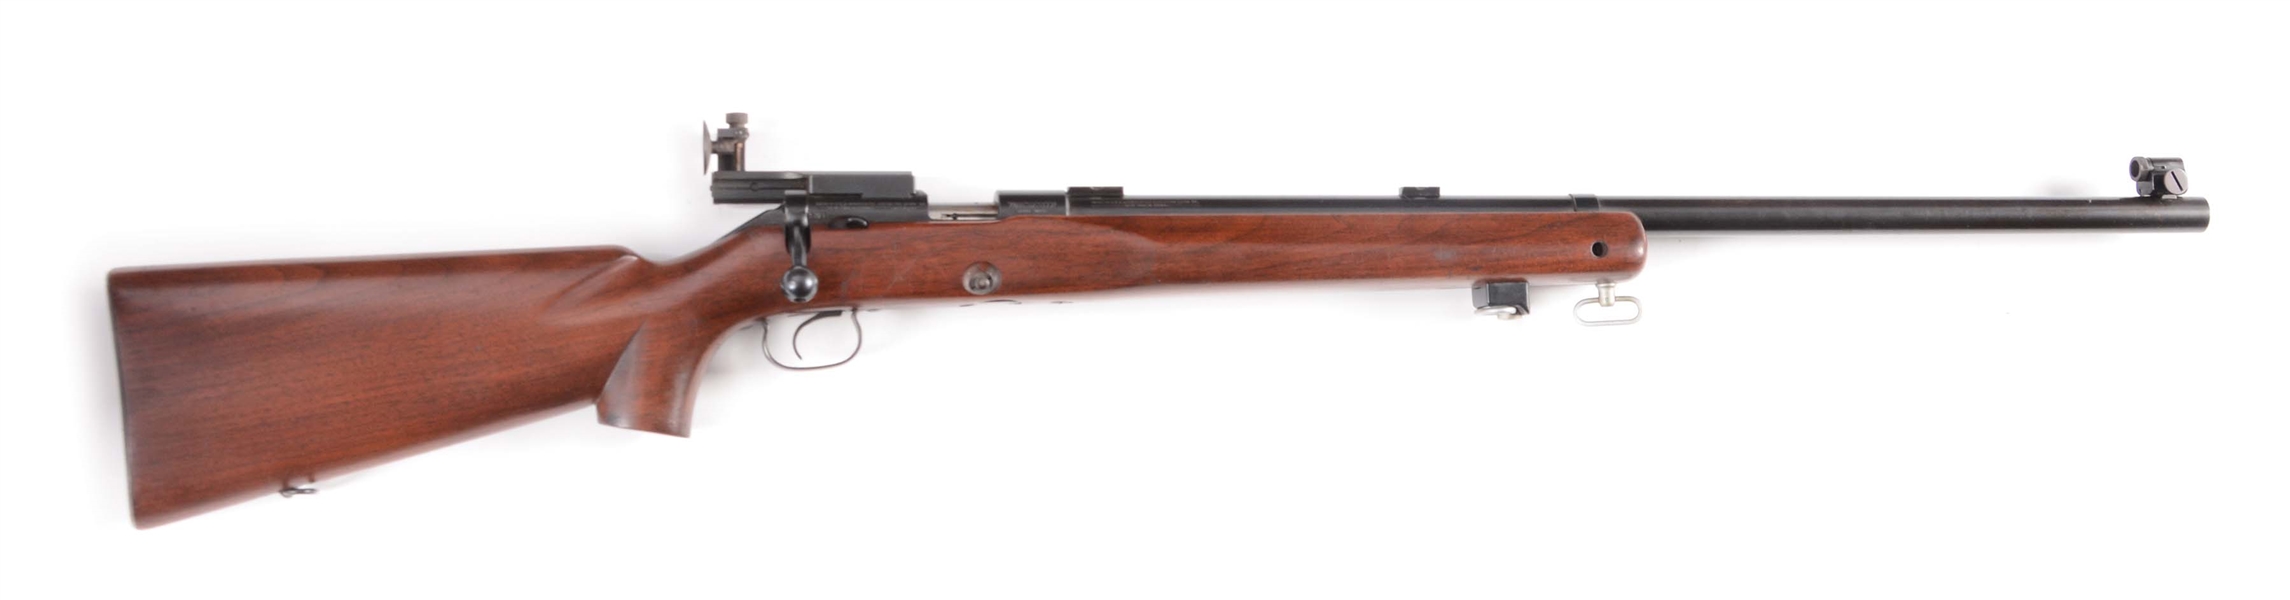 (C) WINCHESTER MODEL 52 BOLT ACTION TARGET RIFLE (1946).